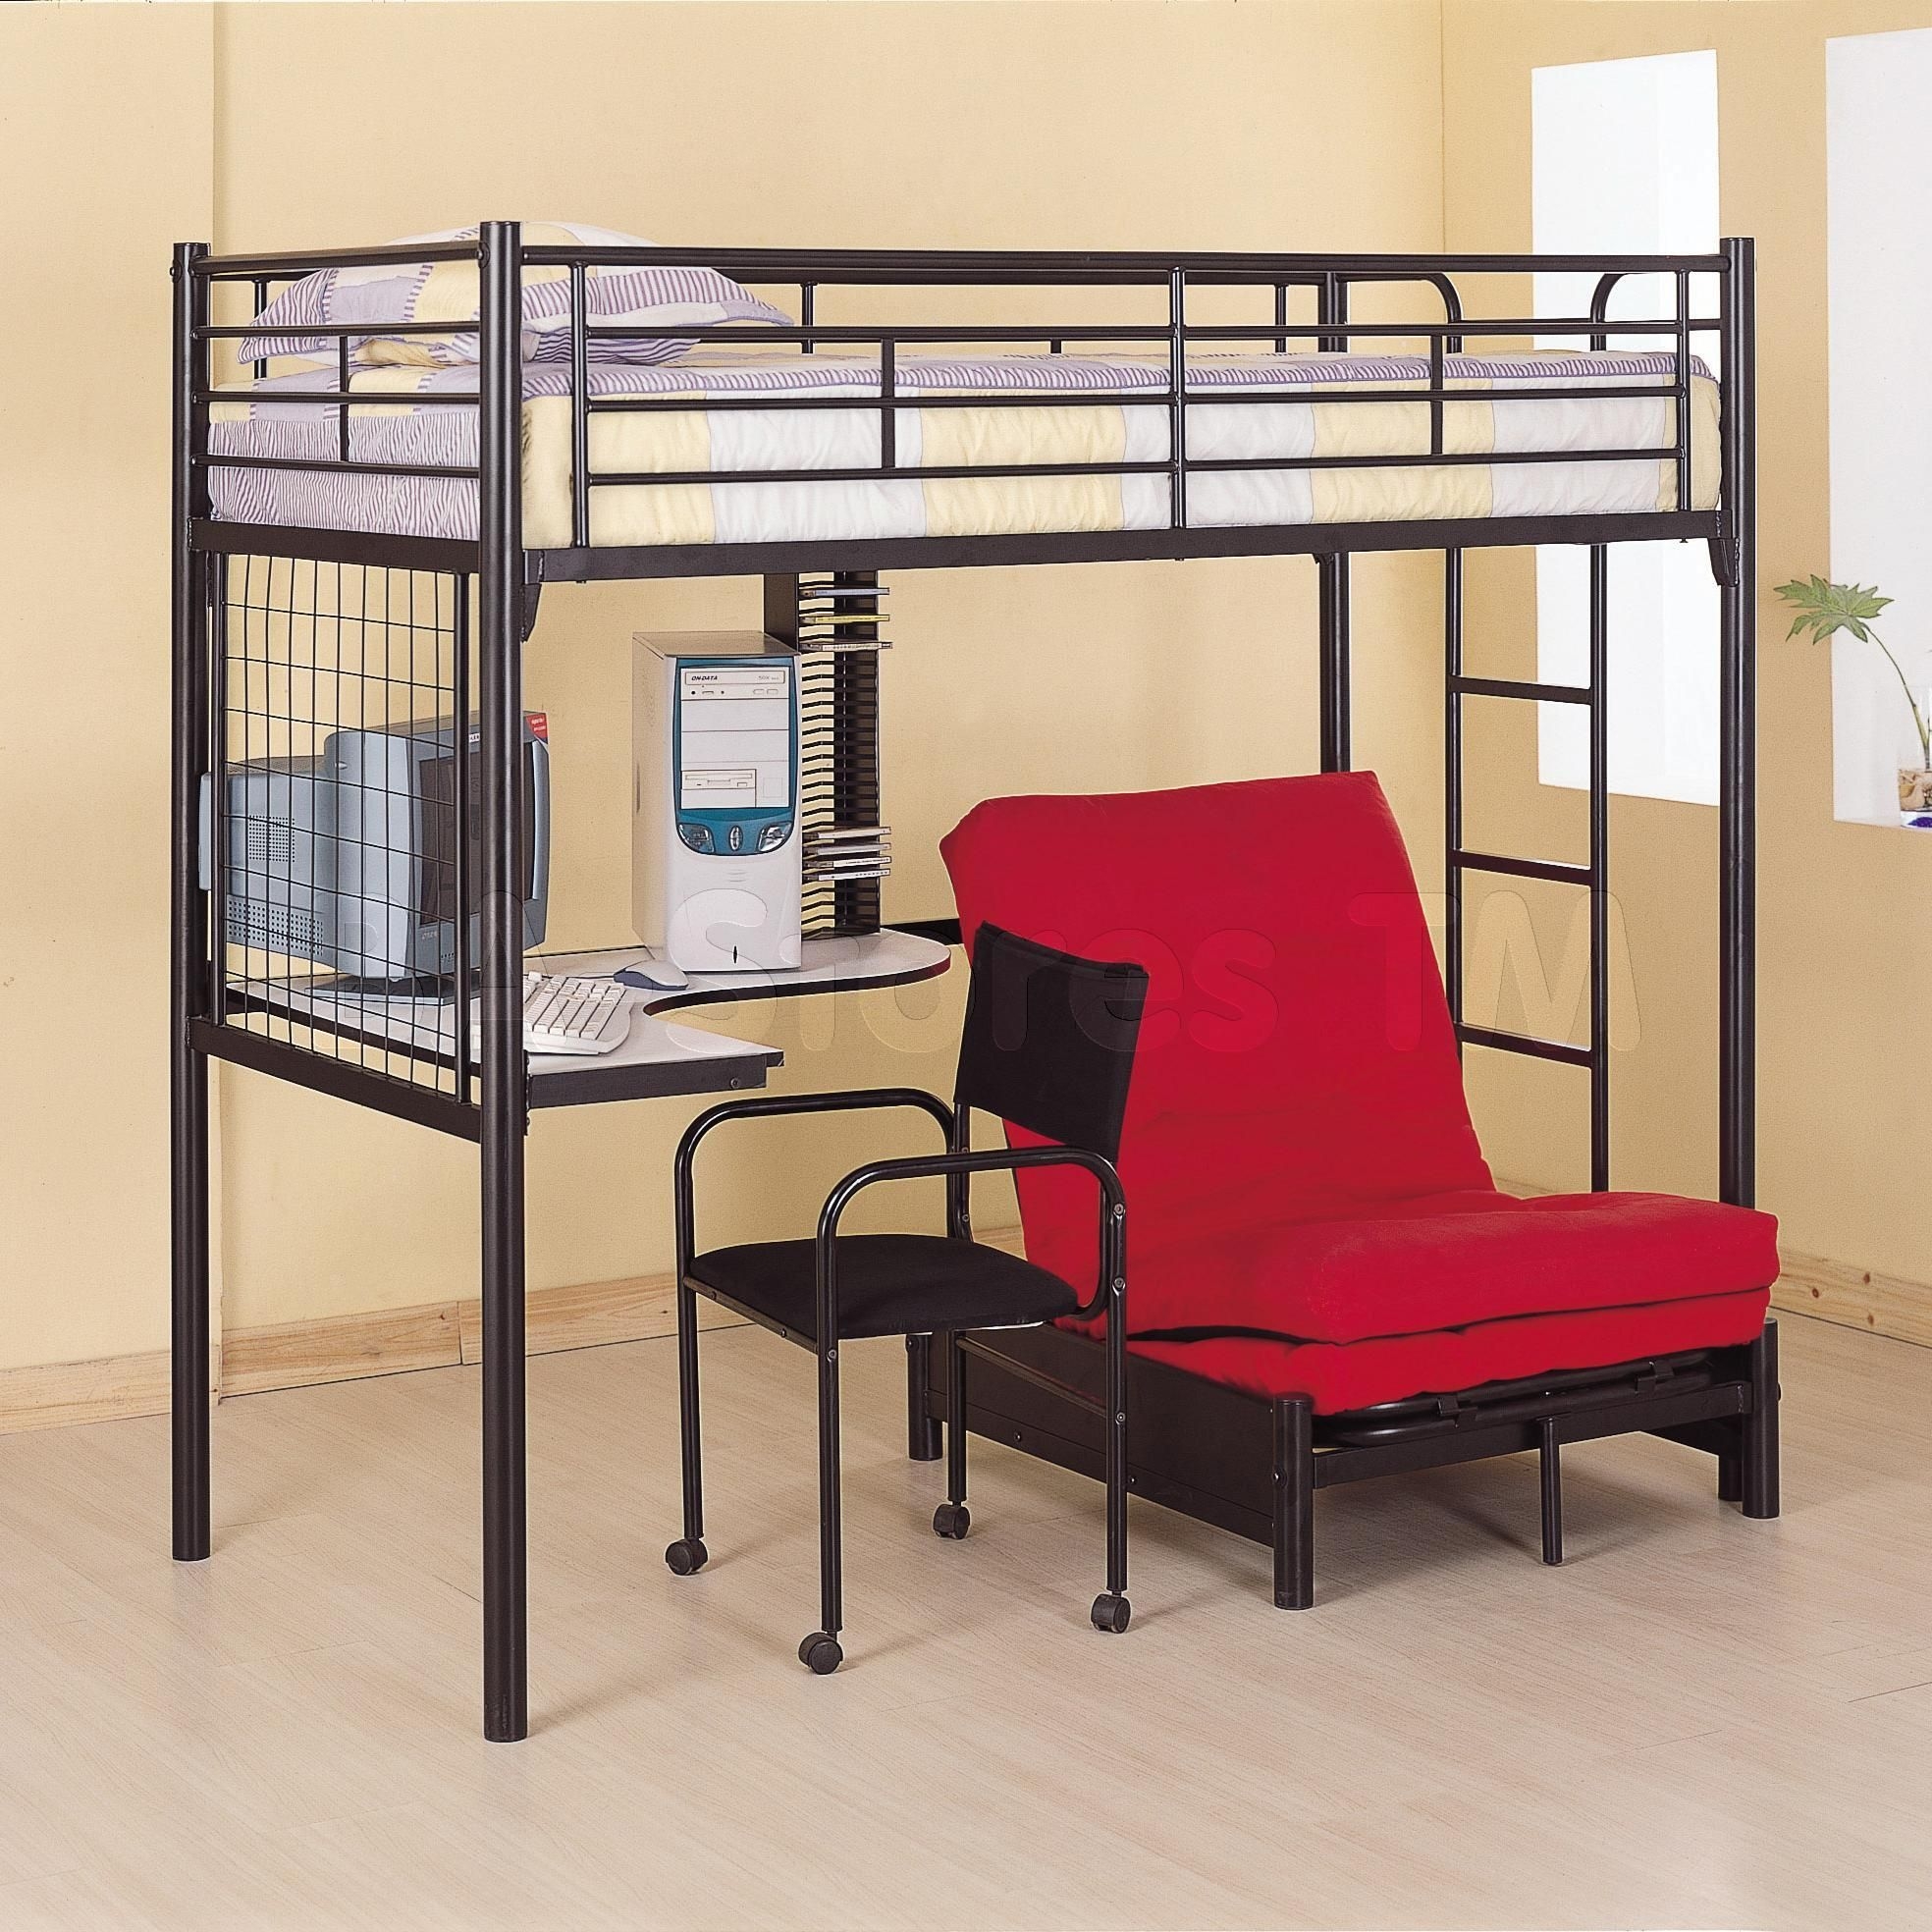 Bunk Bed With Desk And Futon Ideas On Foter